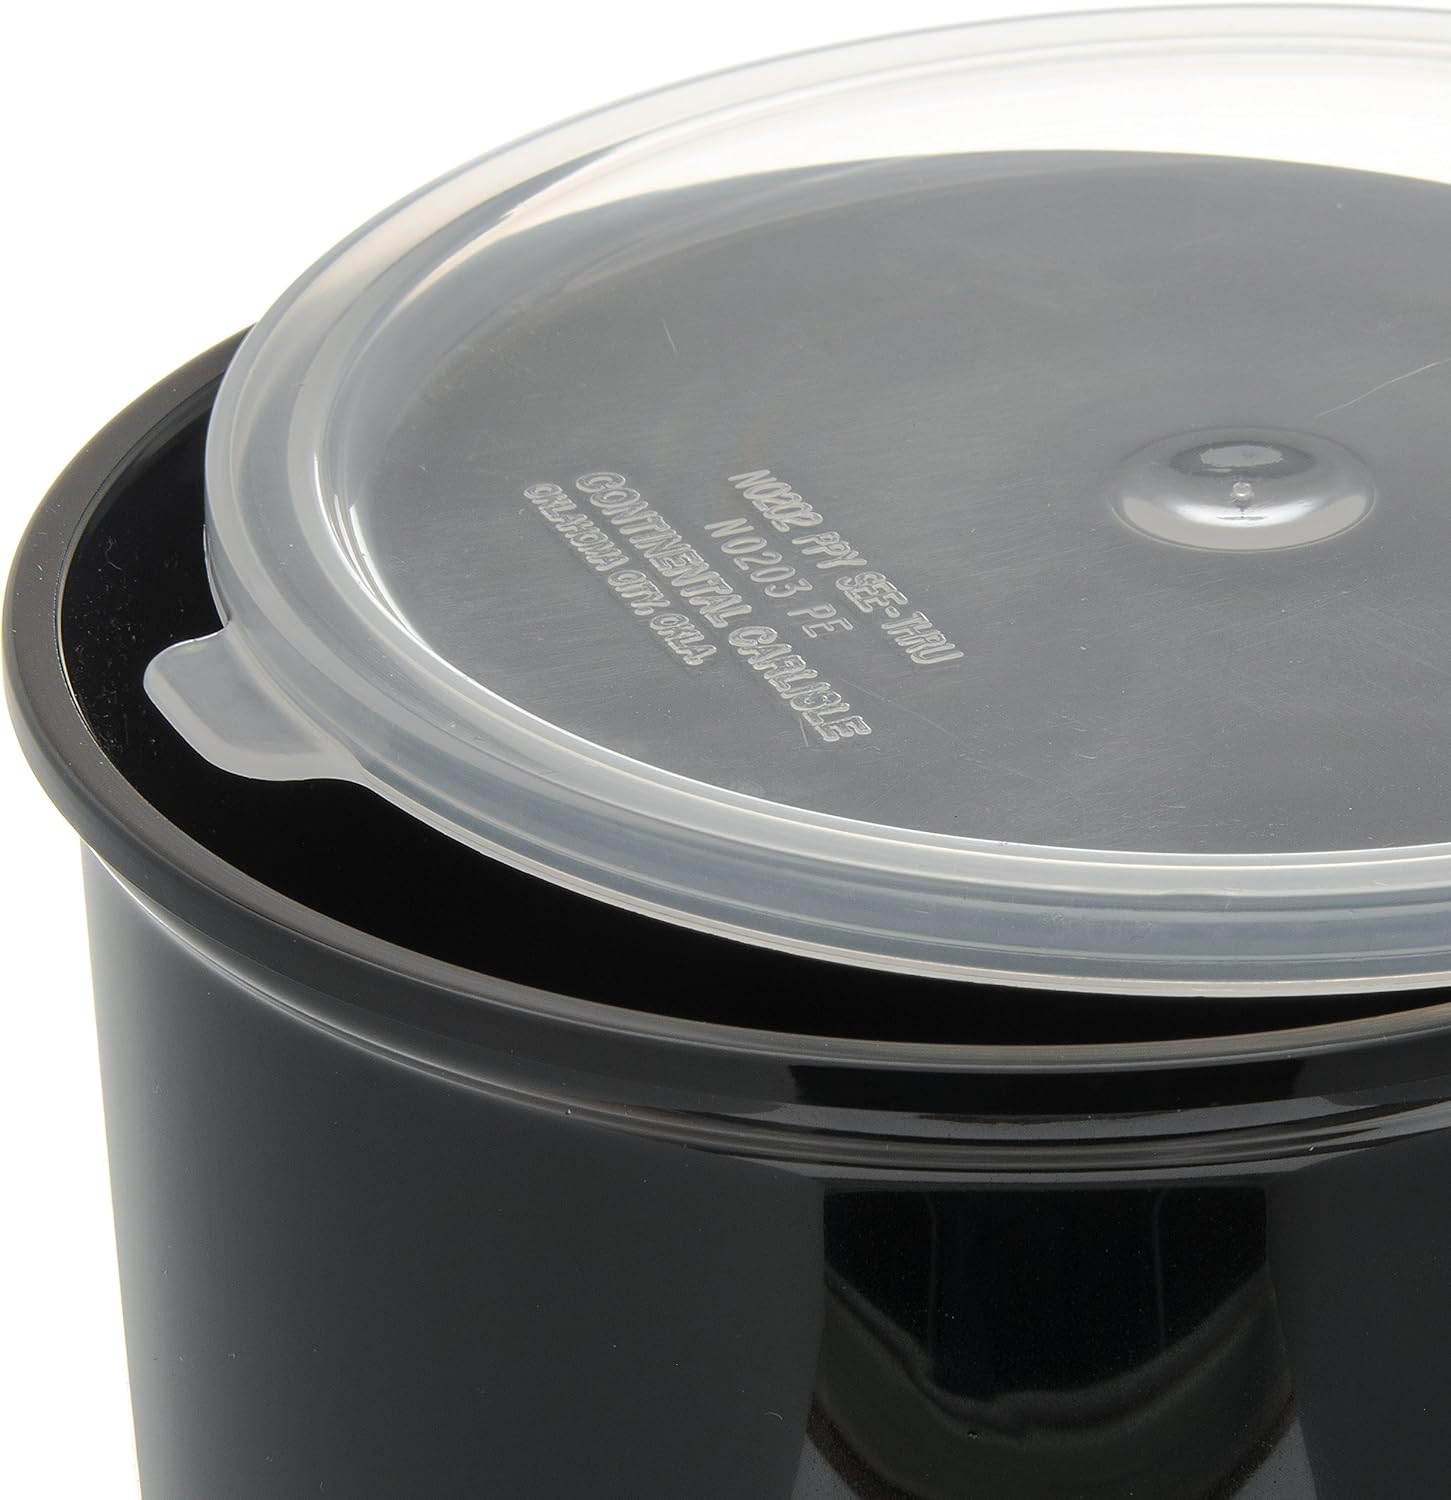 Generic Carlisle 030203 Solid Color Commercial Round Storage Container with Lid, 2.7 Quart Capacity, Black